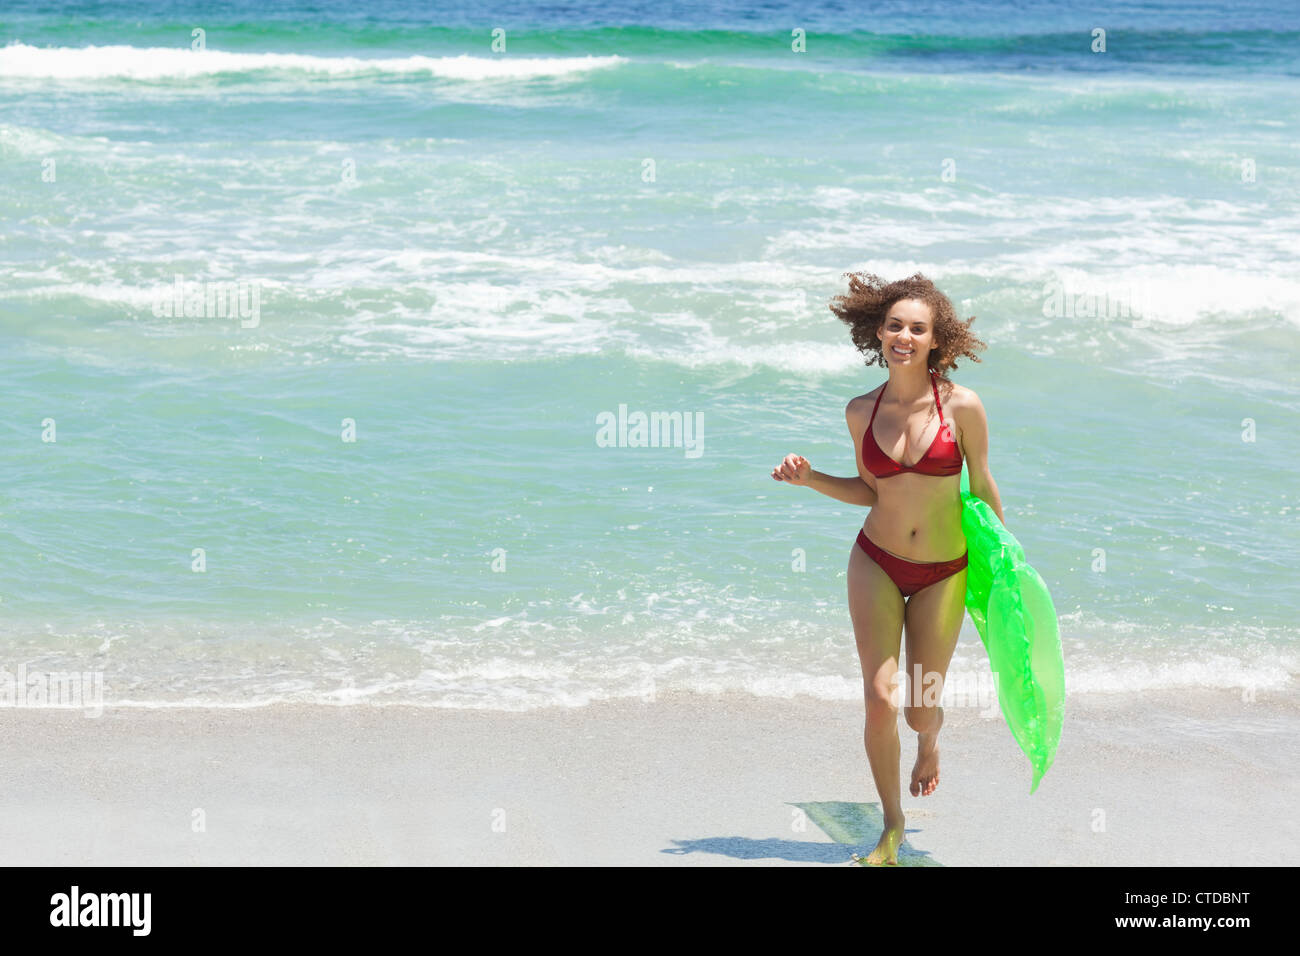 Woman in a bikini running while carrying a air bed Stock Photo